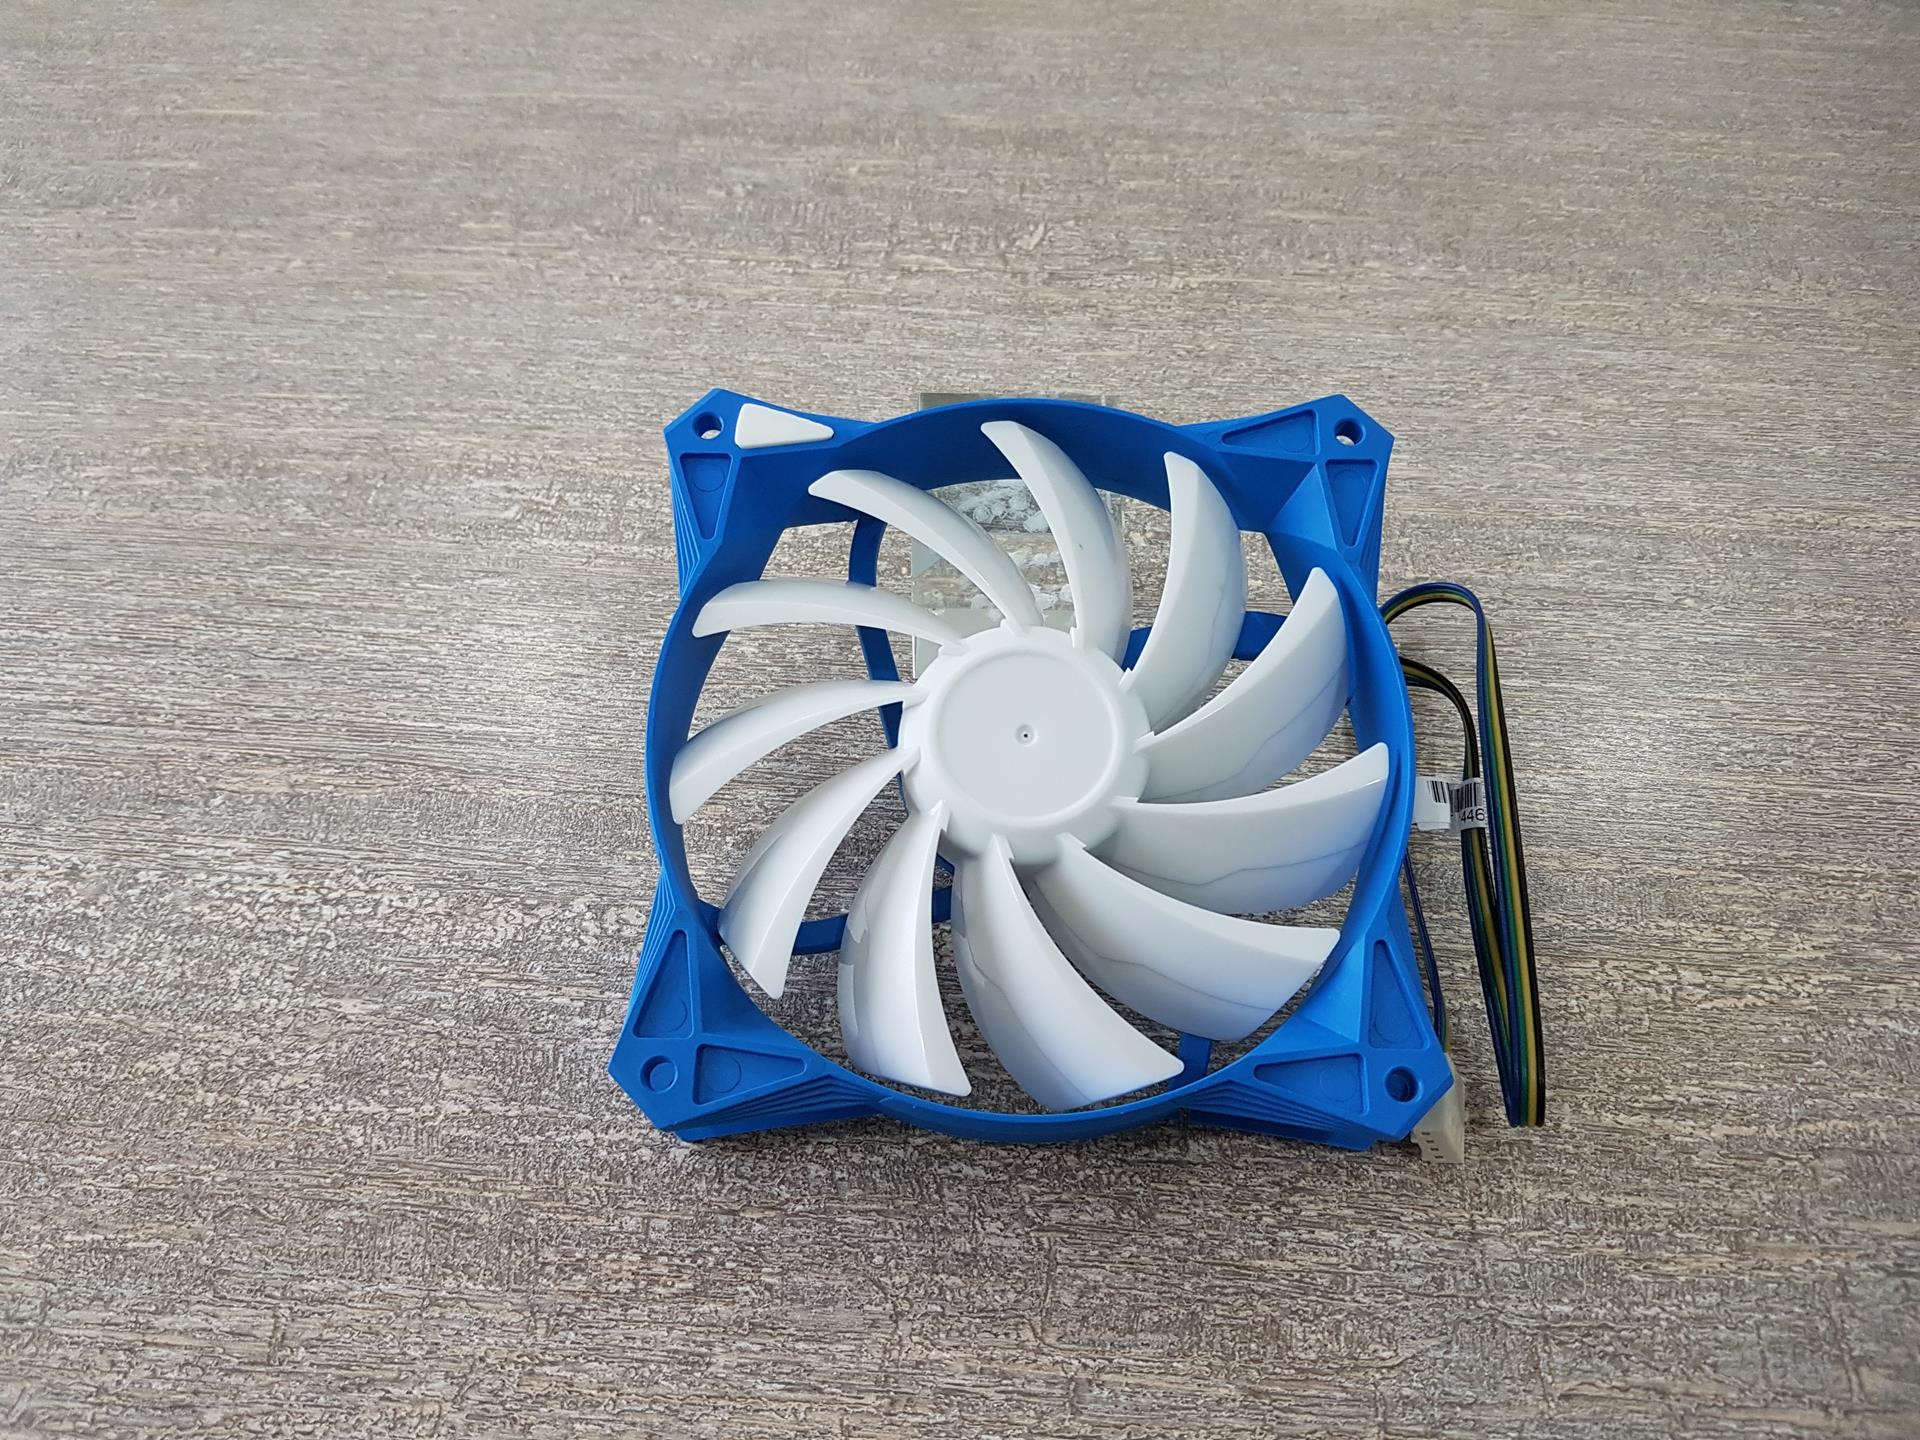 SilverStone SST-FW122 Professional PWM 120mm Fans Review